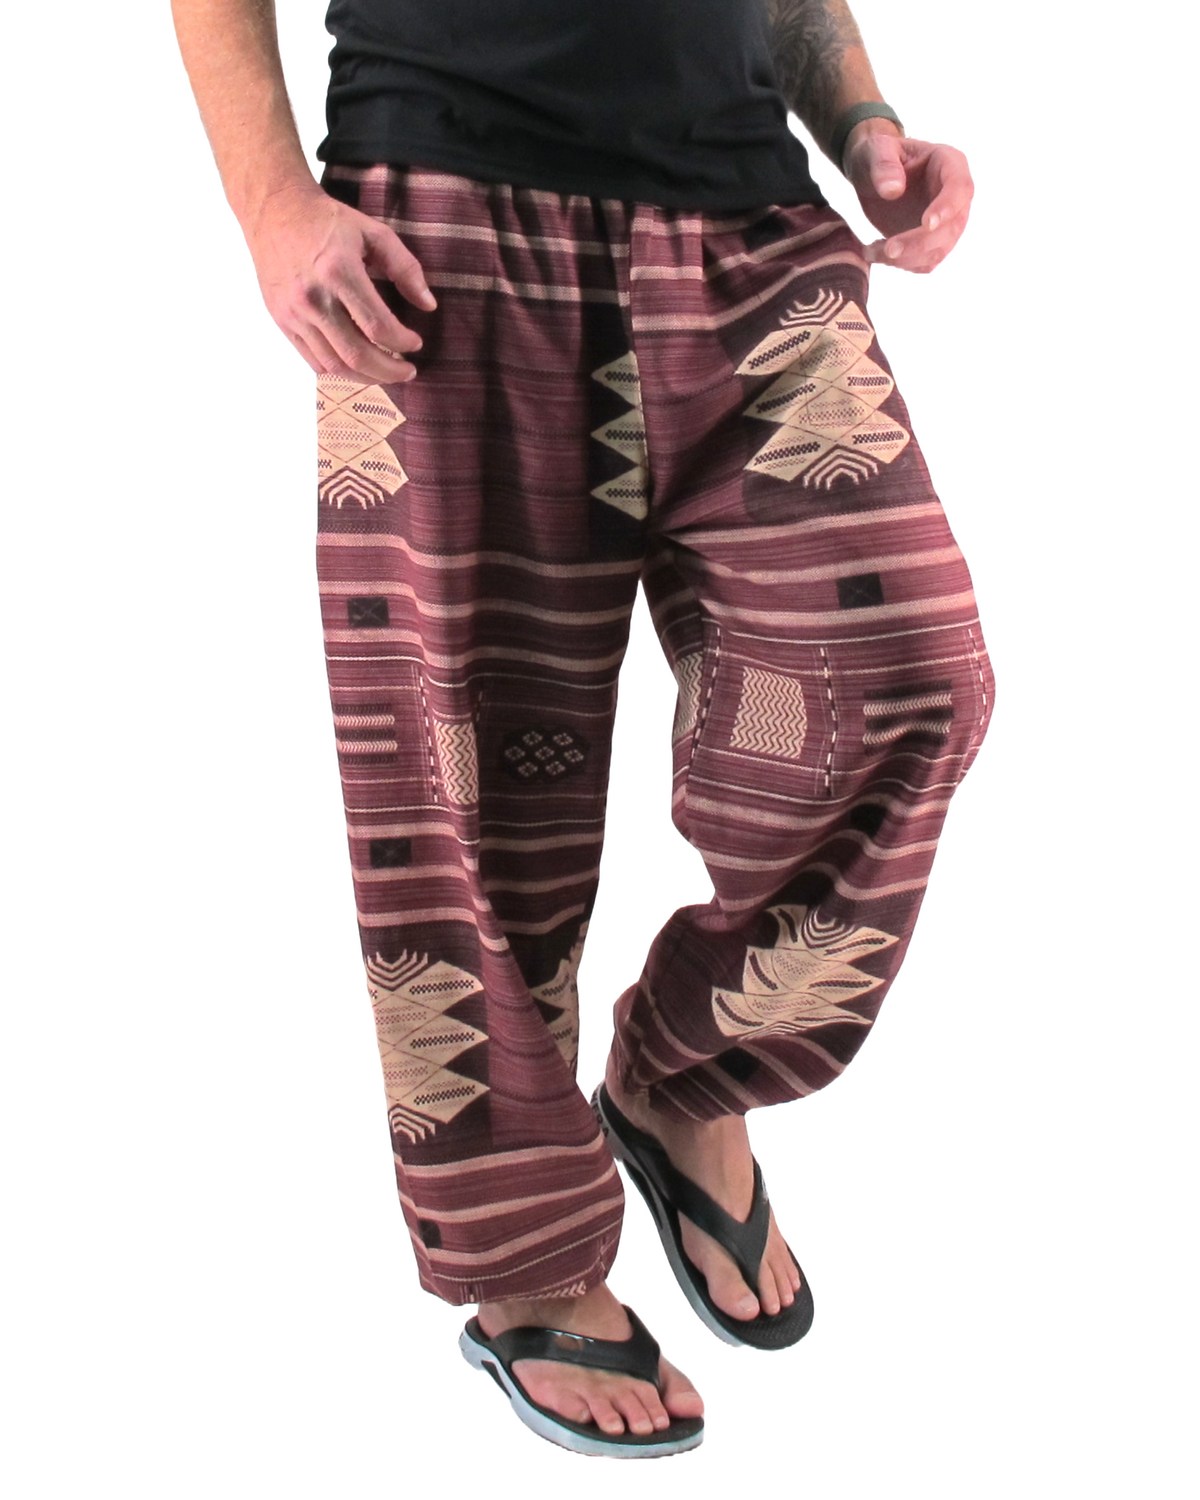 Printed Cotton Hippie Pants Red